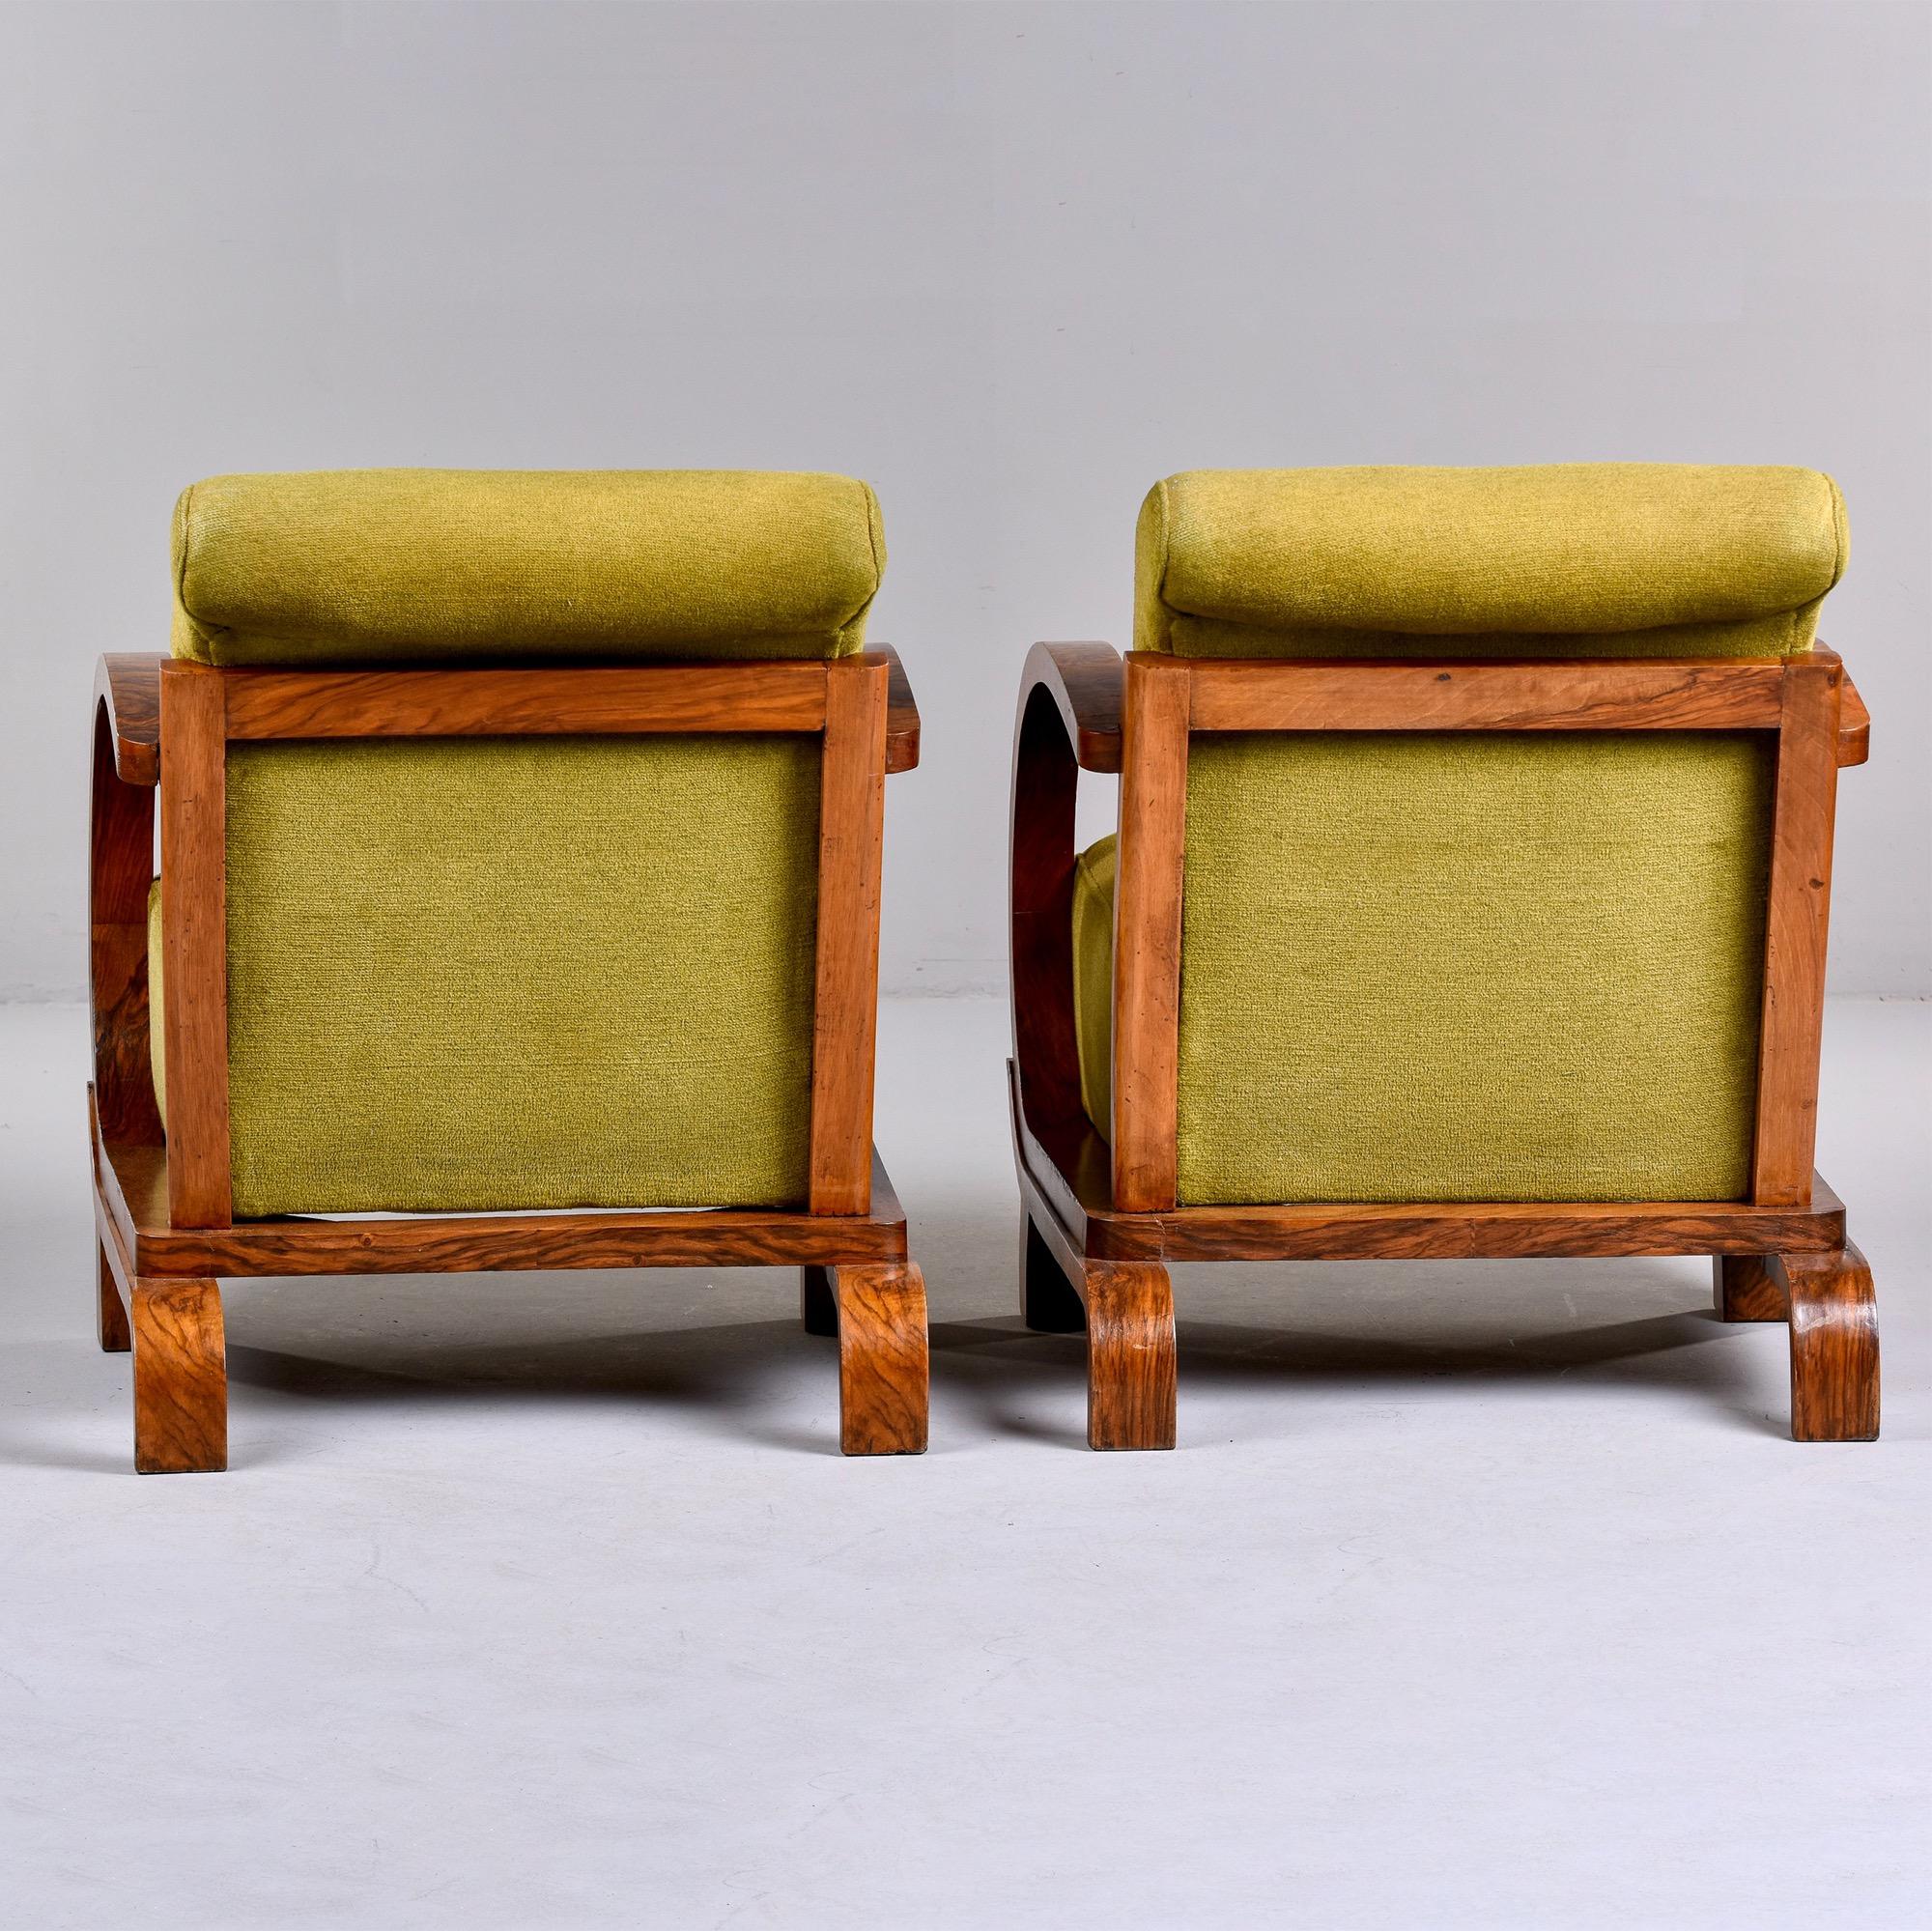 Pair French Art Deco Walnut Bentwood Armchairs with Original Upholstery 1